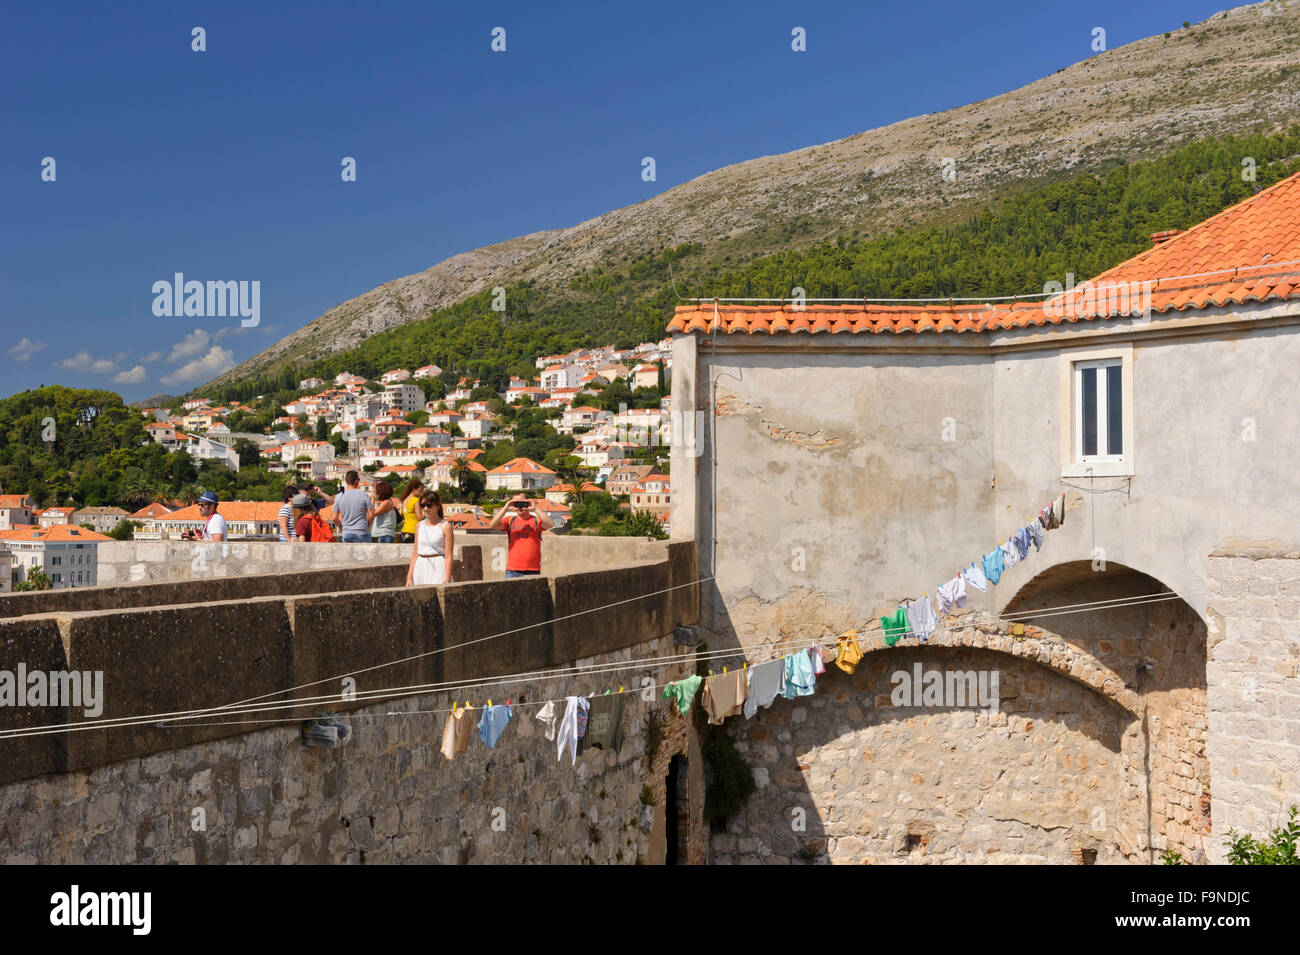 People walking along the perimeter of the old fortress, Dubrovnik, Croatia. Stock Photo